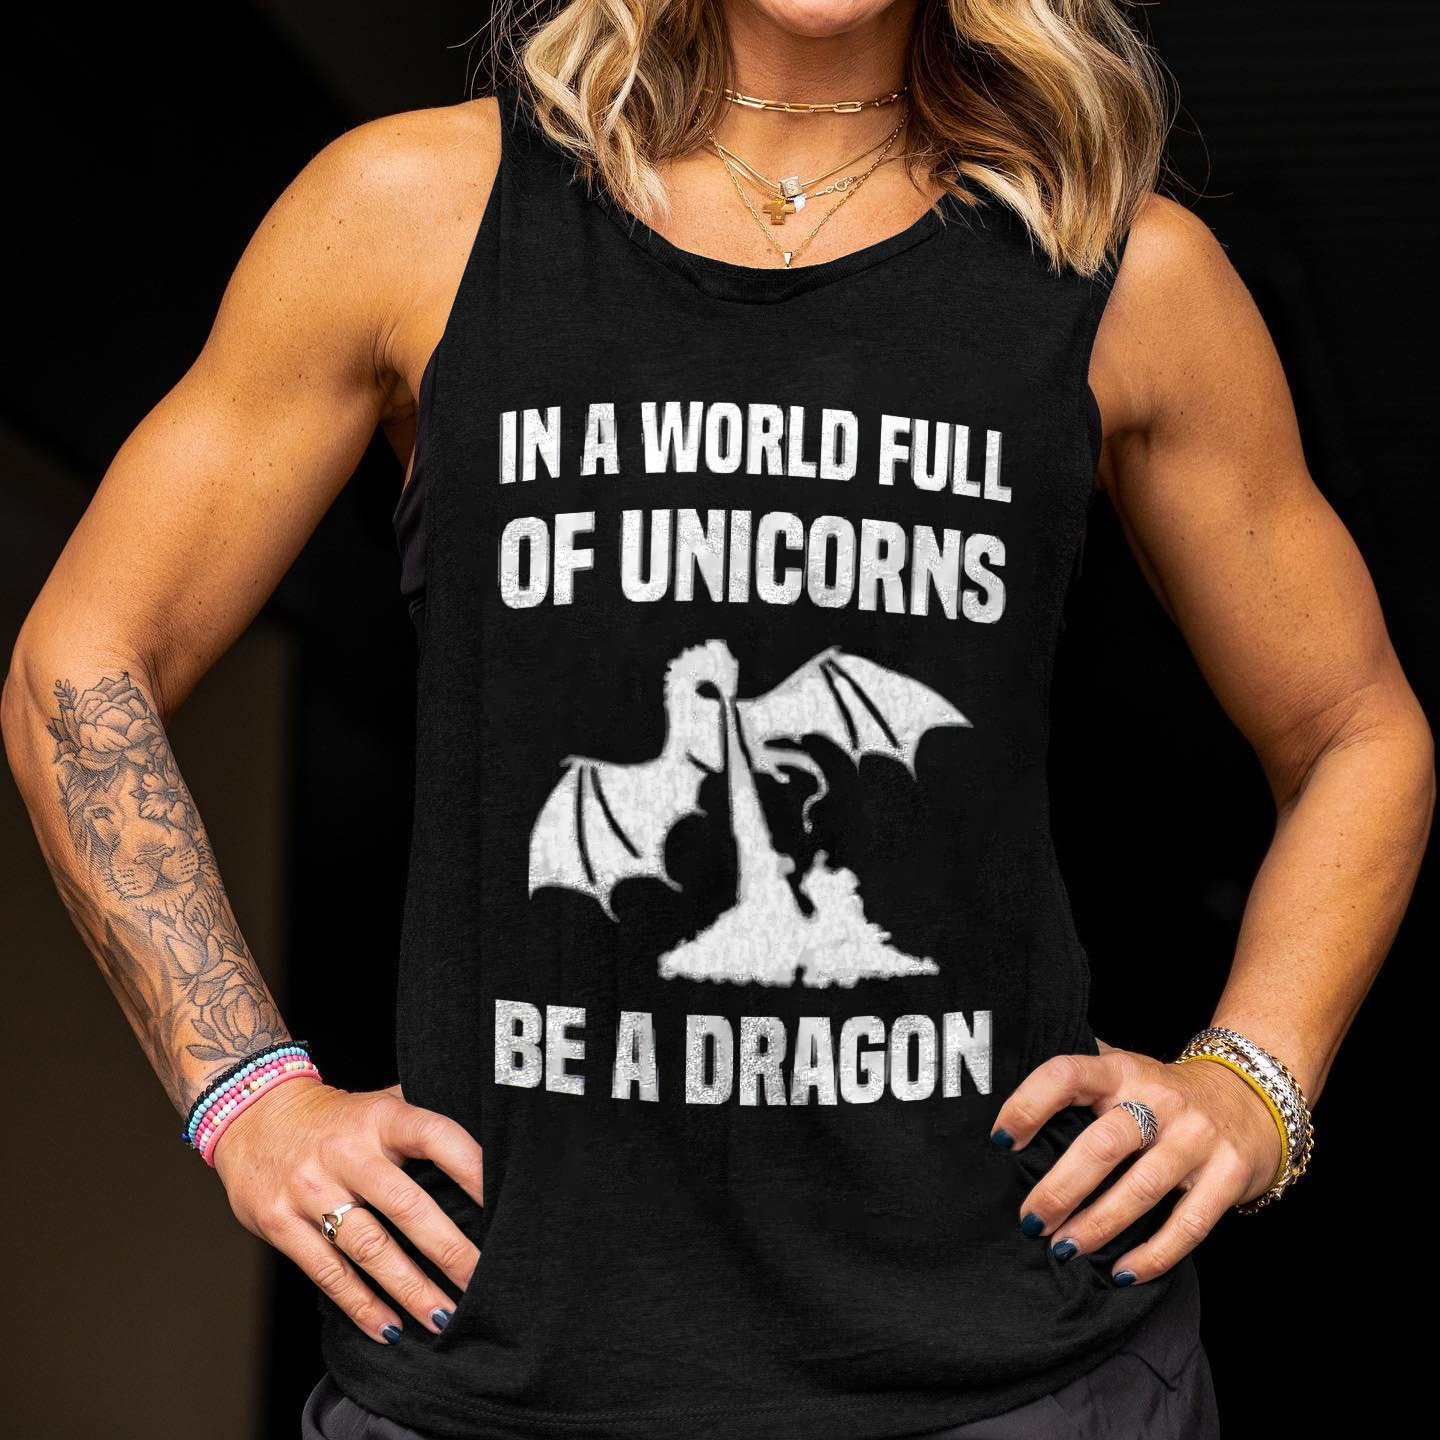 In A World Full Of Unicorns Be A Dragon Printed Women's Vest